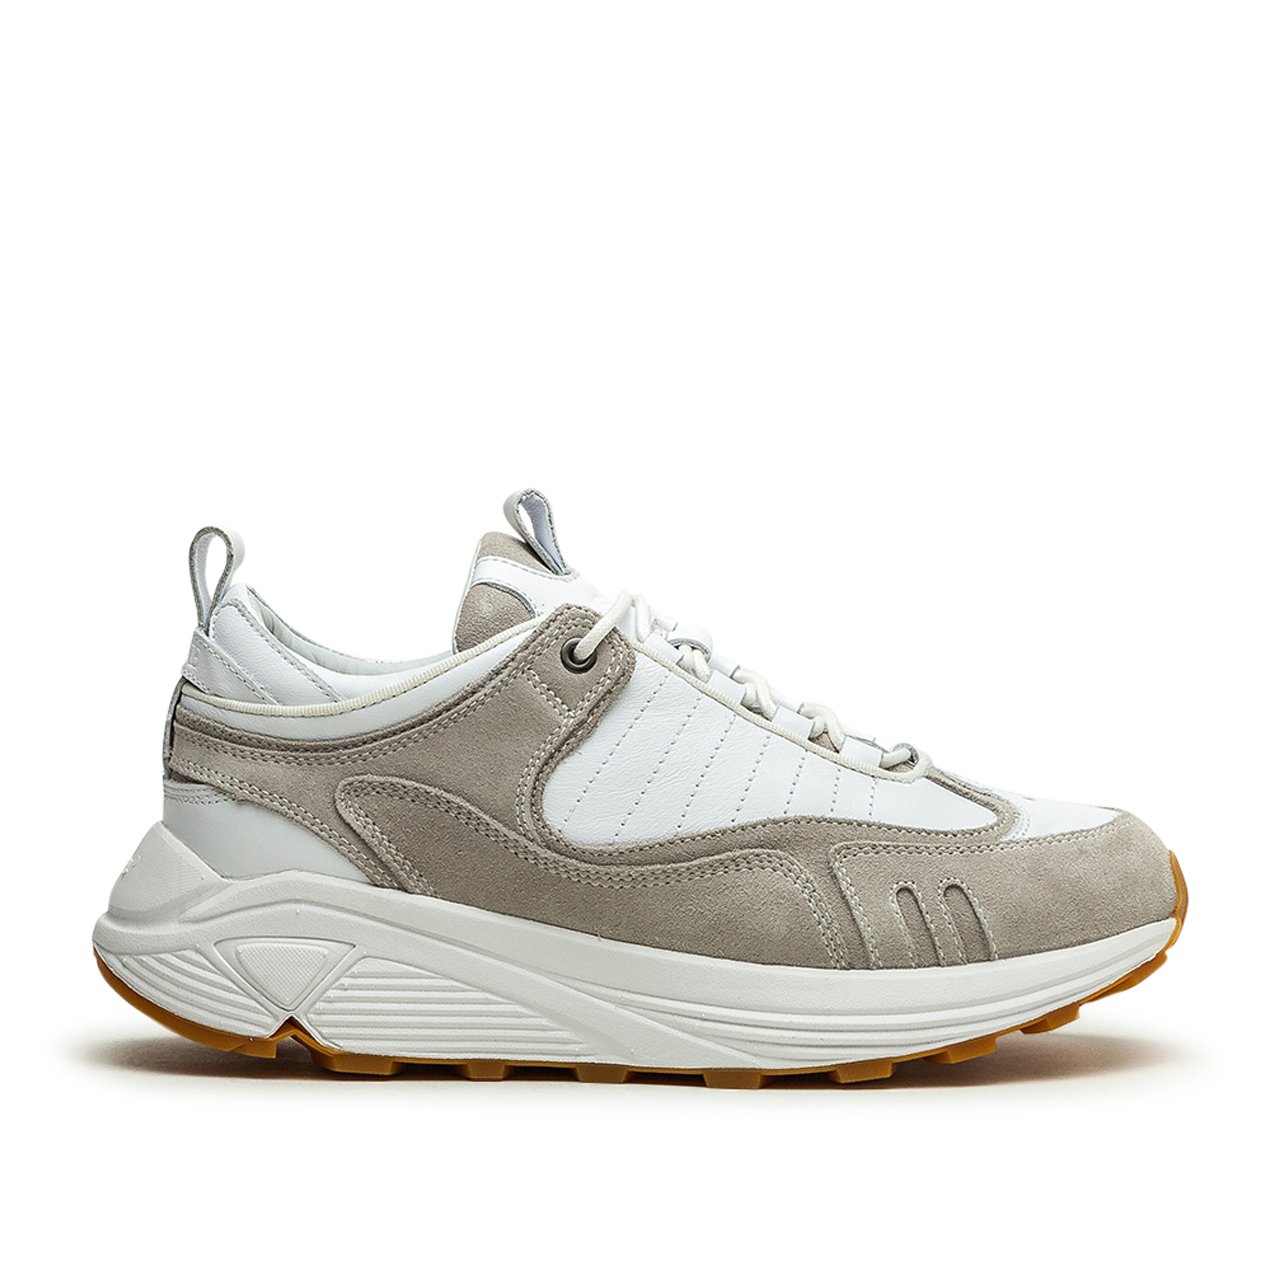 rone footwear ninety seven (white) - s20nsw-1201 - a.plus - Image - 1